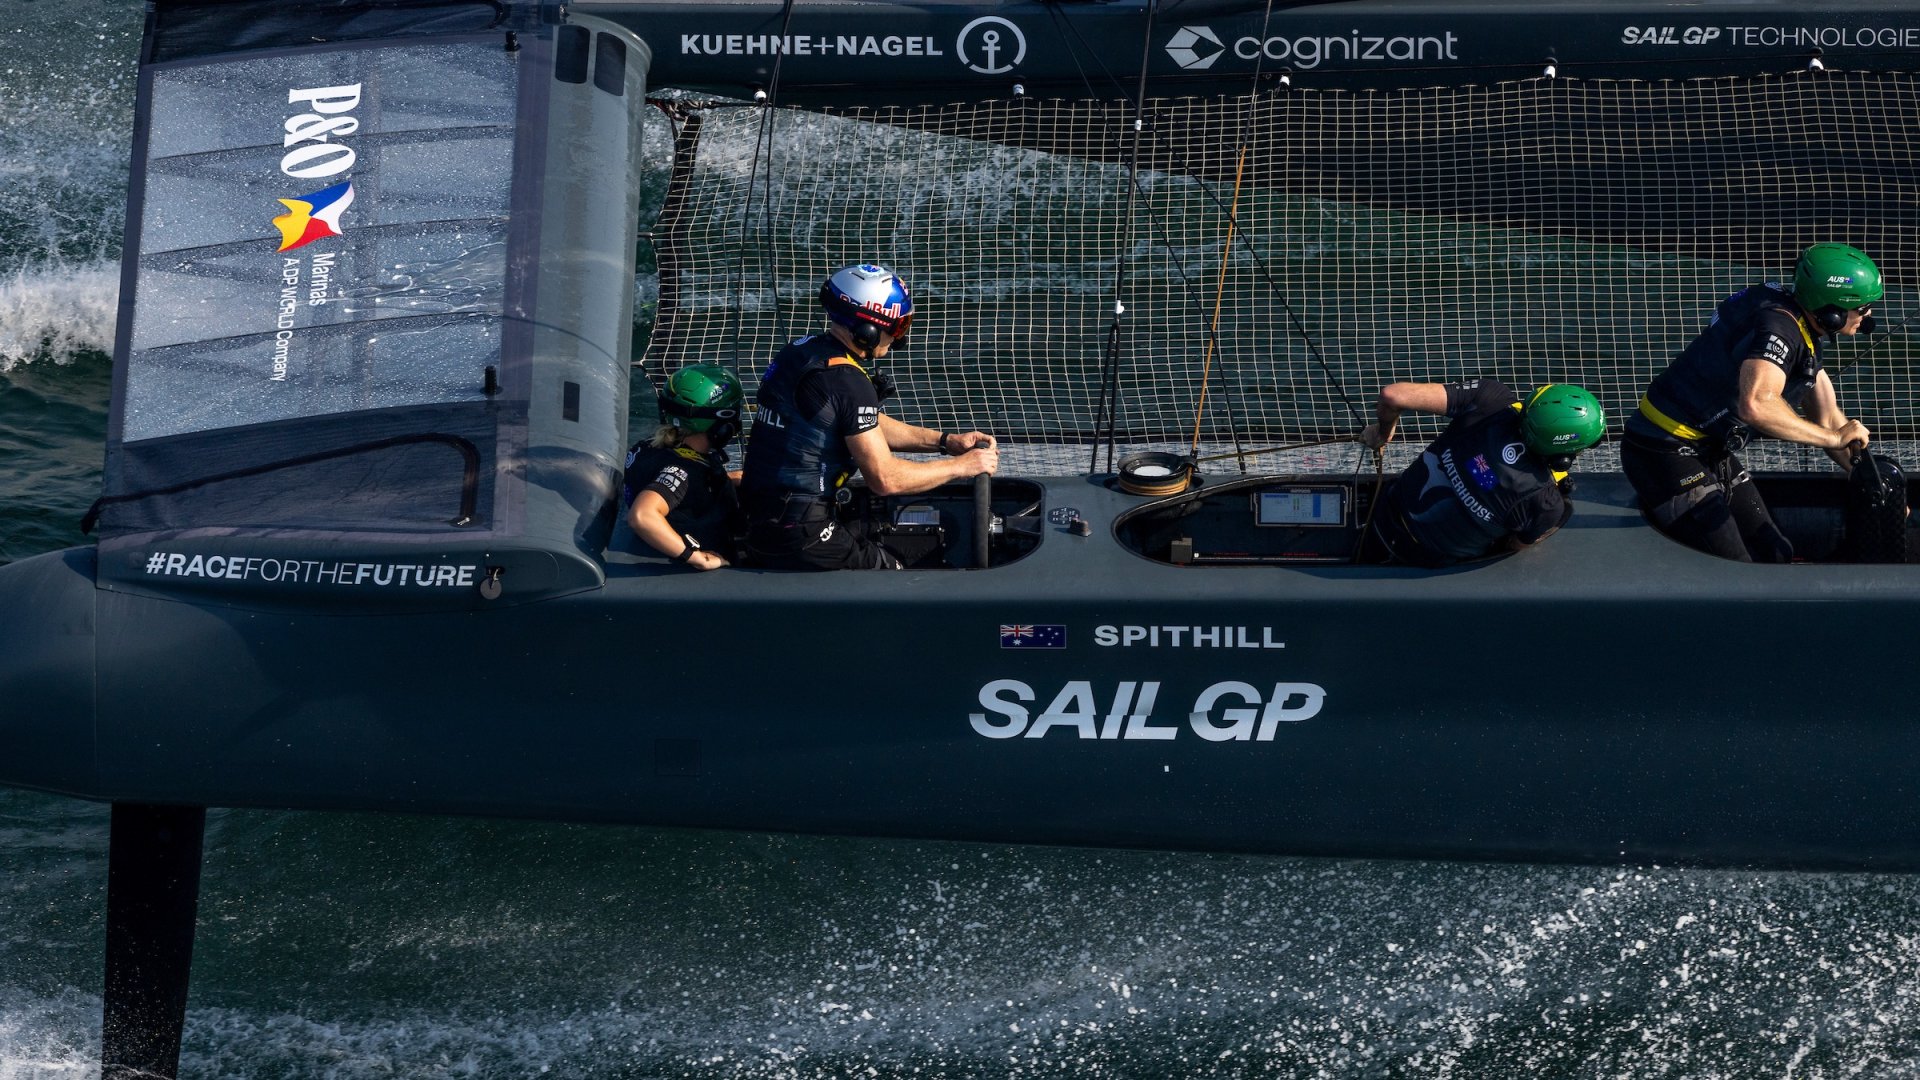 Spithill stuns shoreside crowds by driving Australia to top of leaderboard  on first day of racing in Dubai